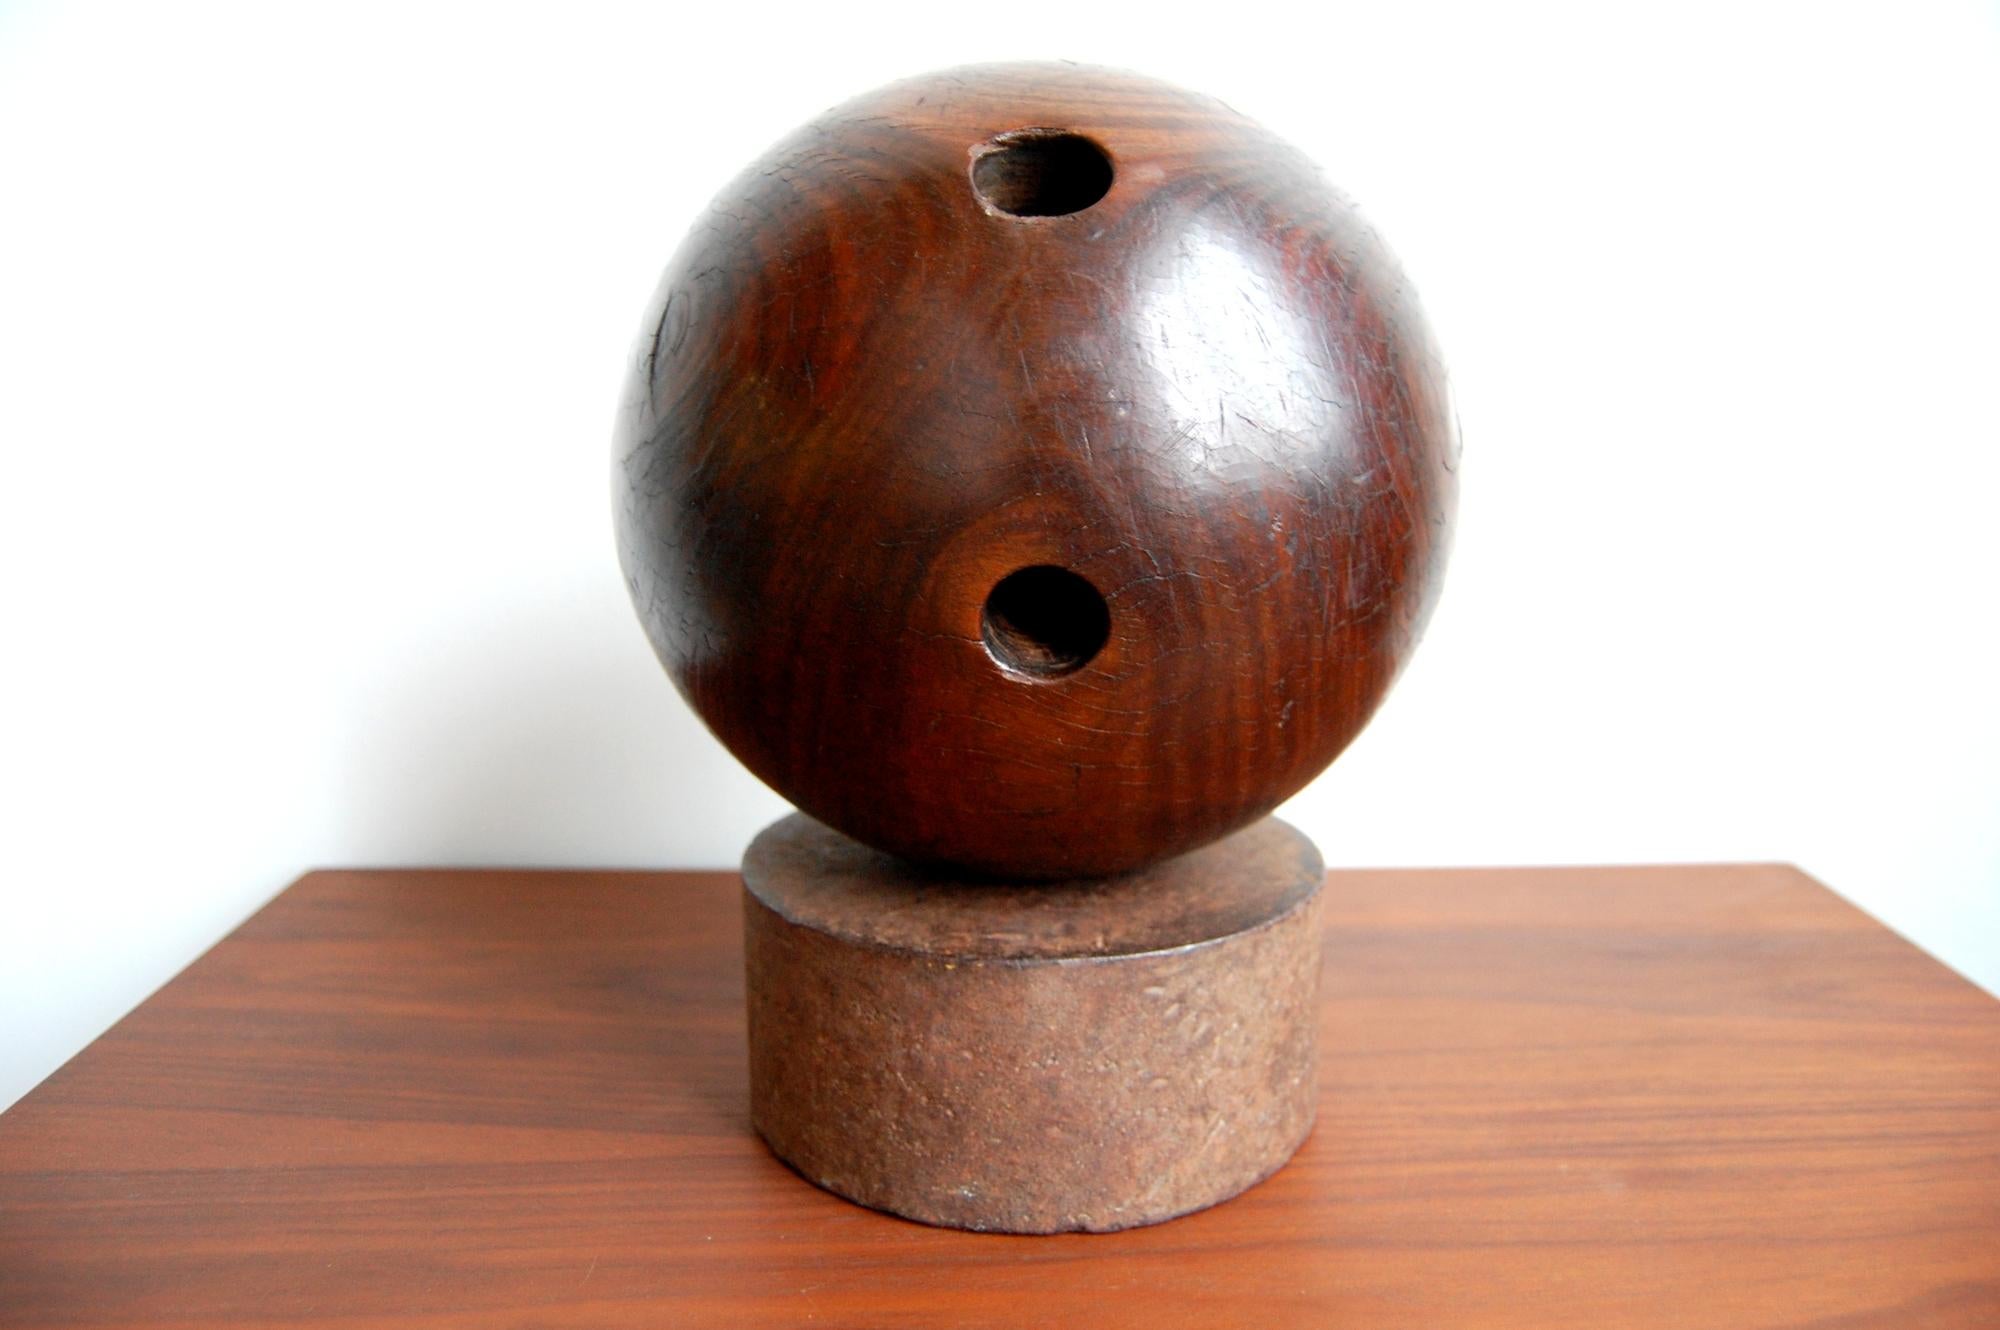 Victorian era Lignum Vitae bowling ball on steel stand. Ball has beautiful patina and figuring. Ball itself measures 8 1/2